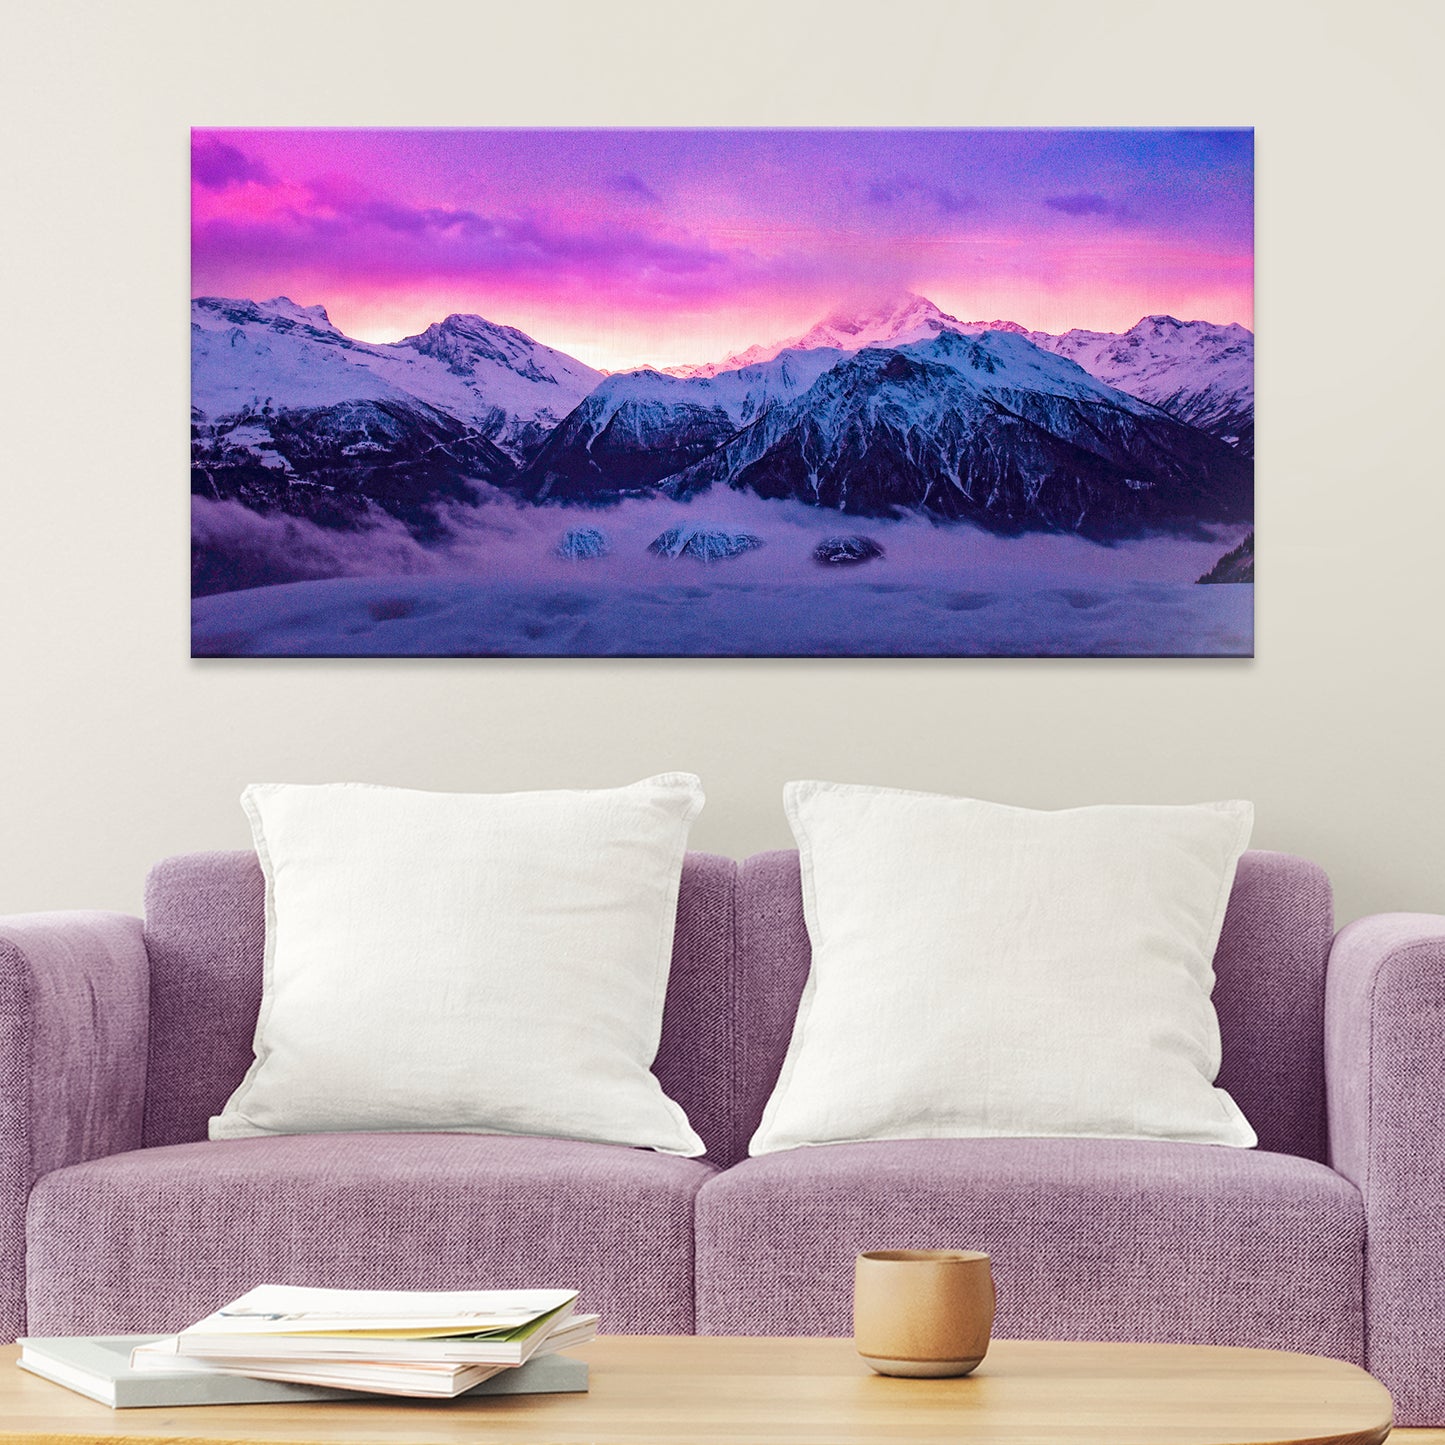 Pink Sky Over Snowy Mountains Canvas Wall Art - Image by Tailored Canvases